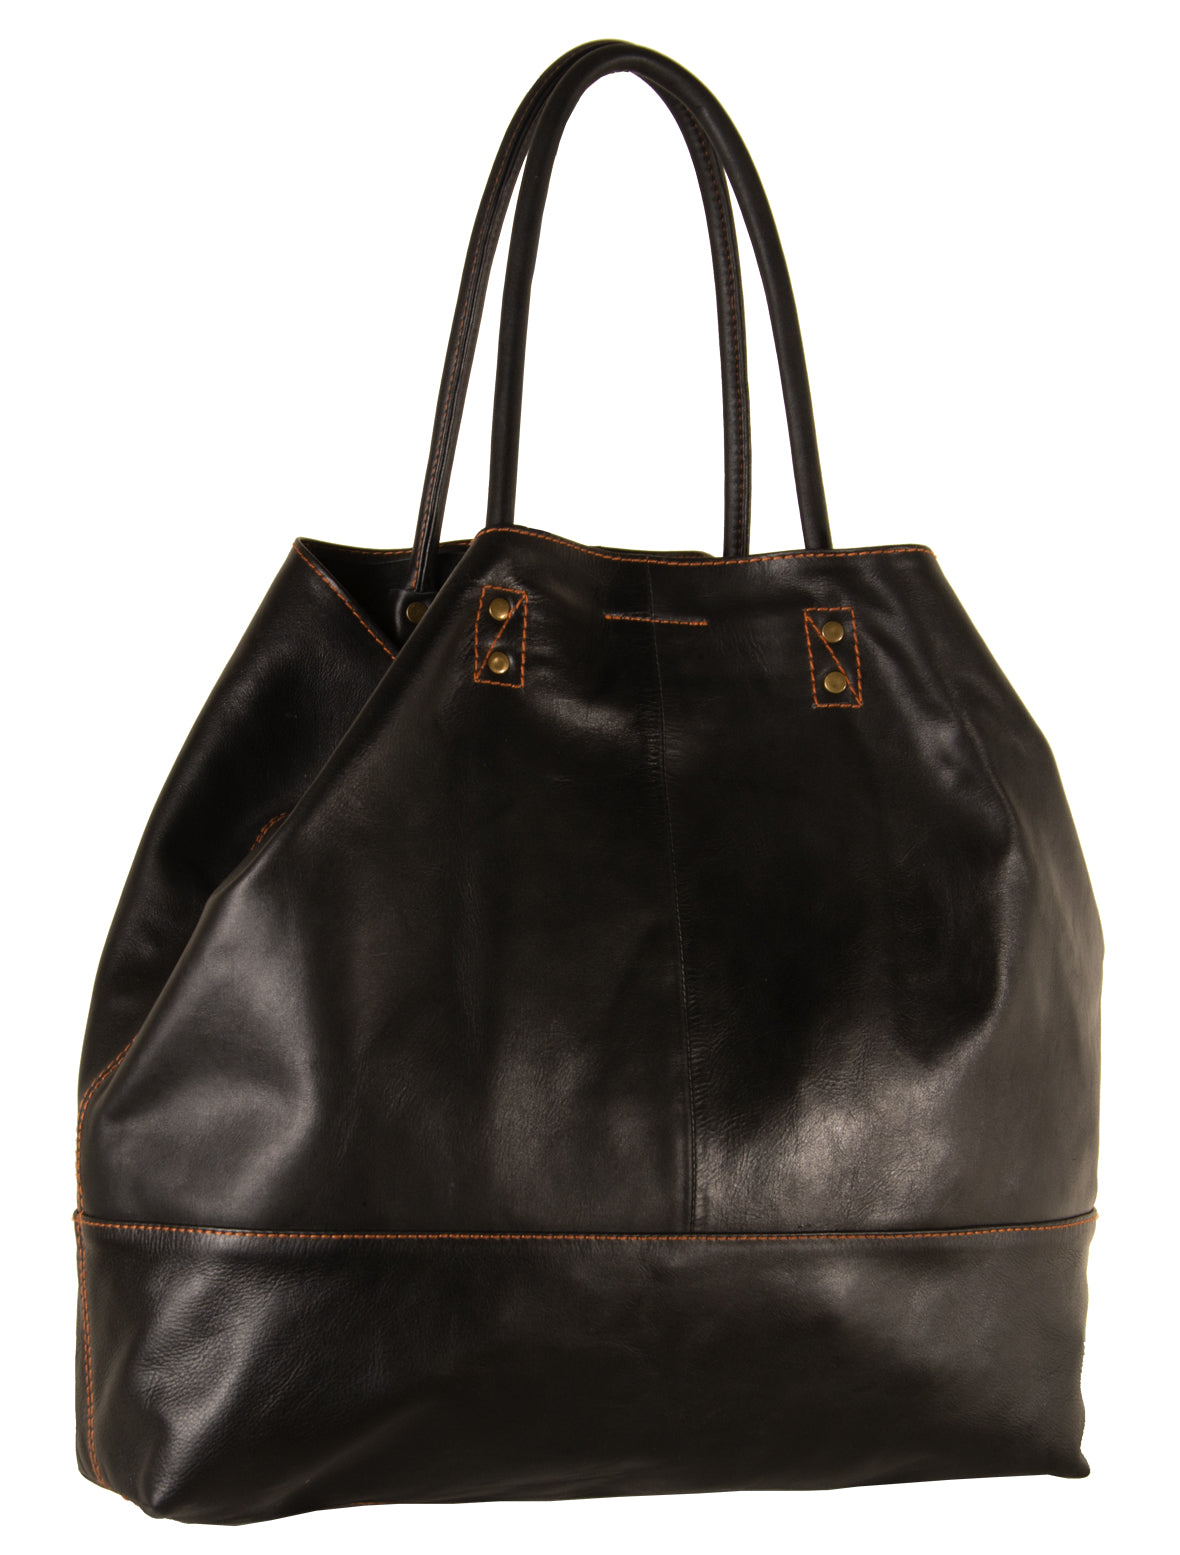 Gail Grande Tote - With Pouch